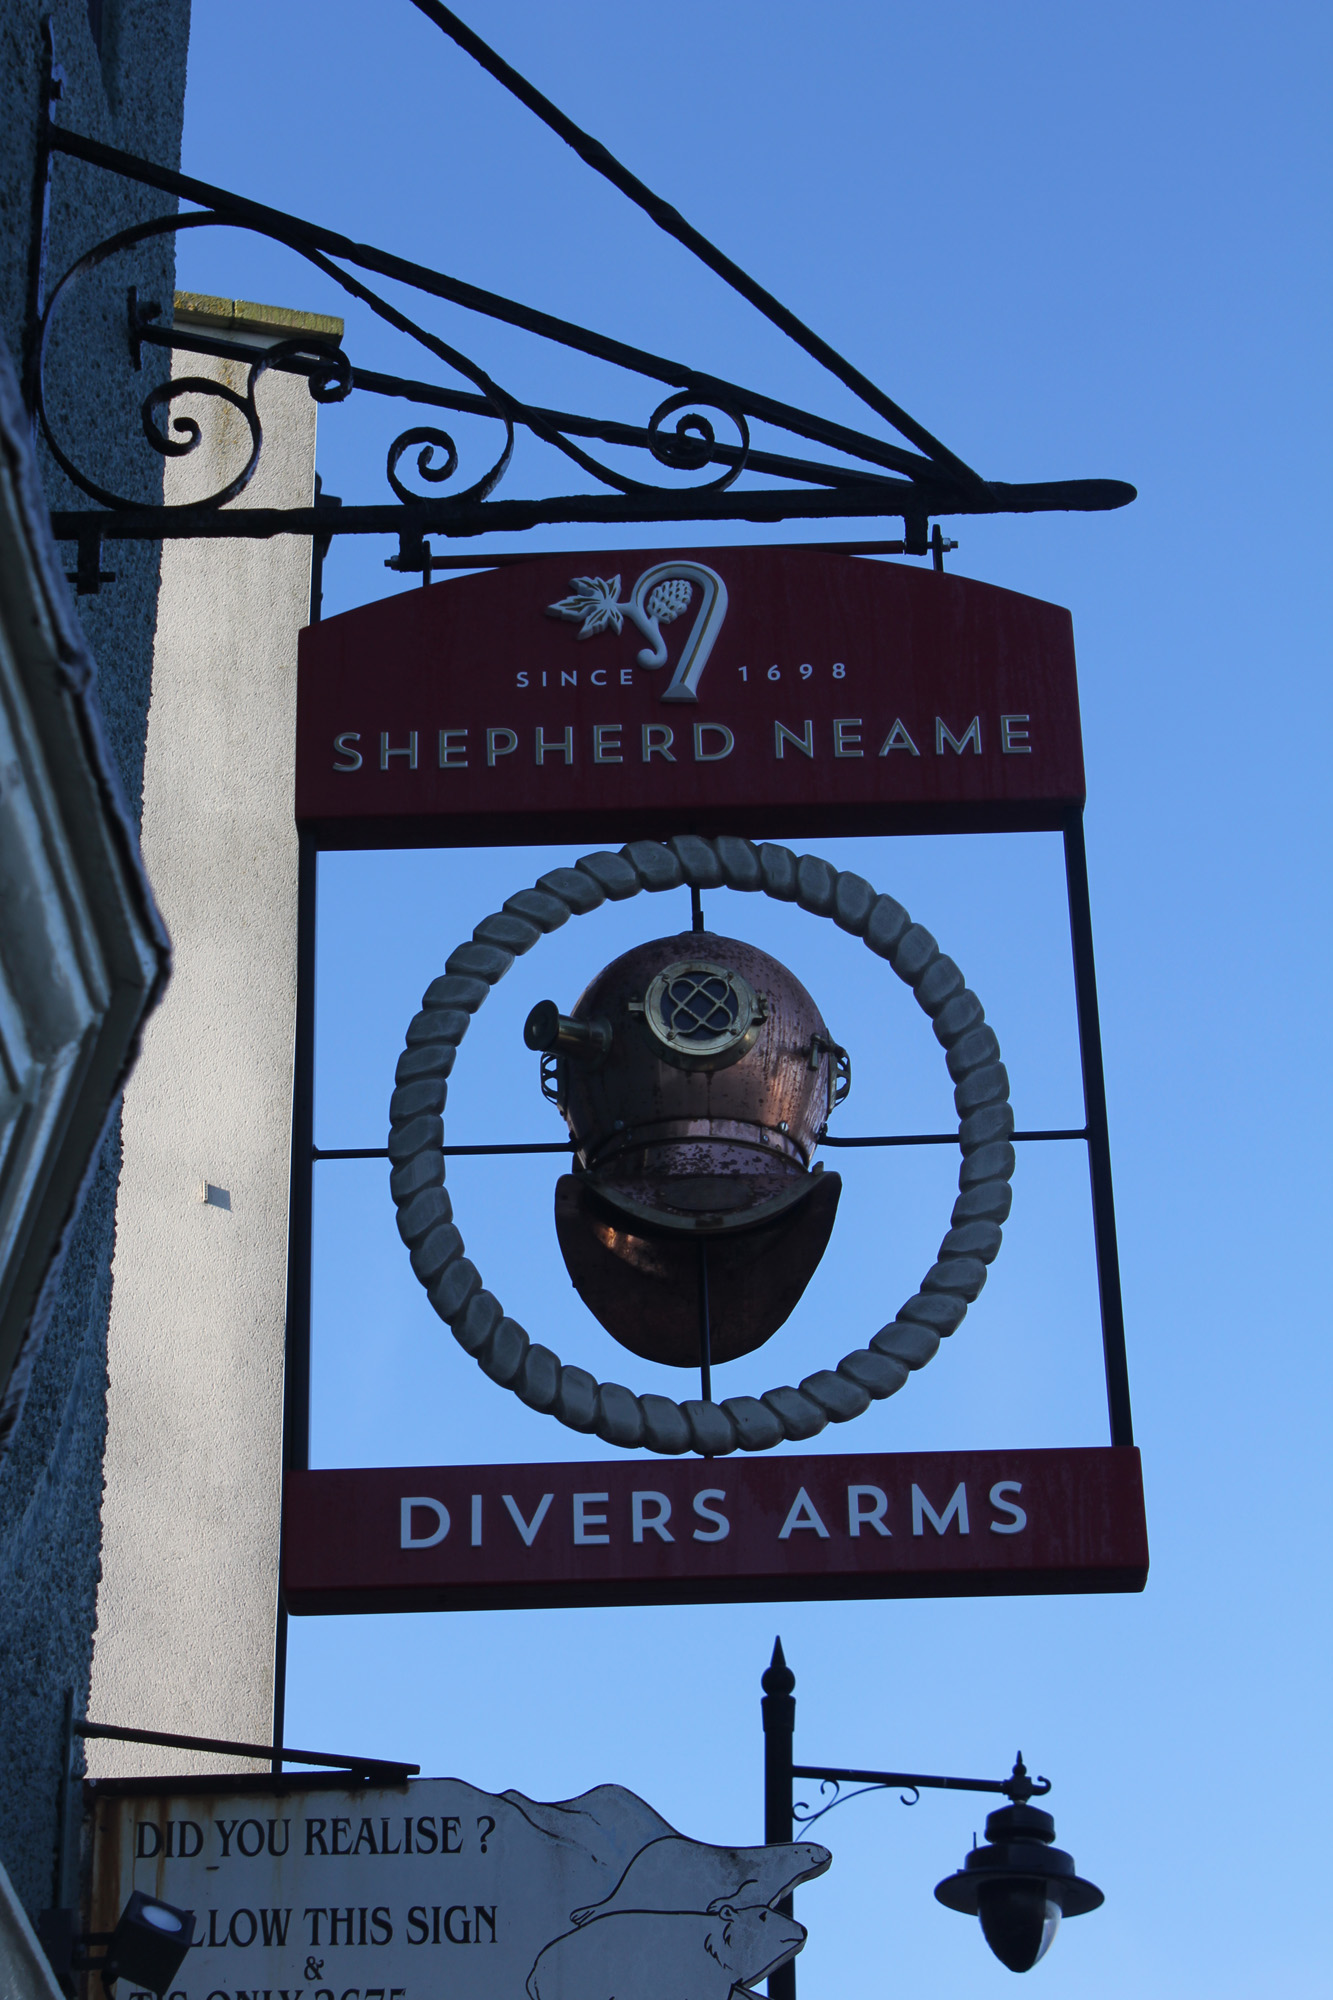 Pub Of The Week The Divers Arms Herne Bay